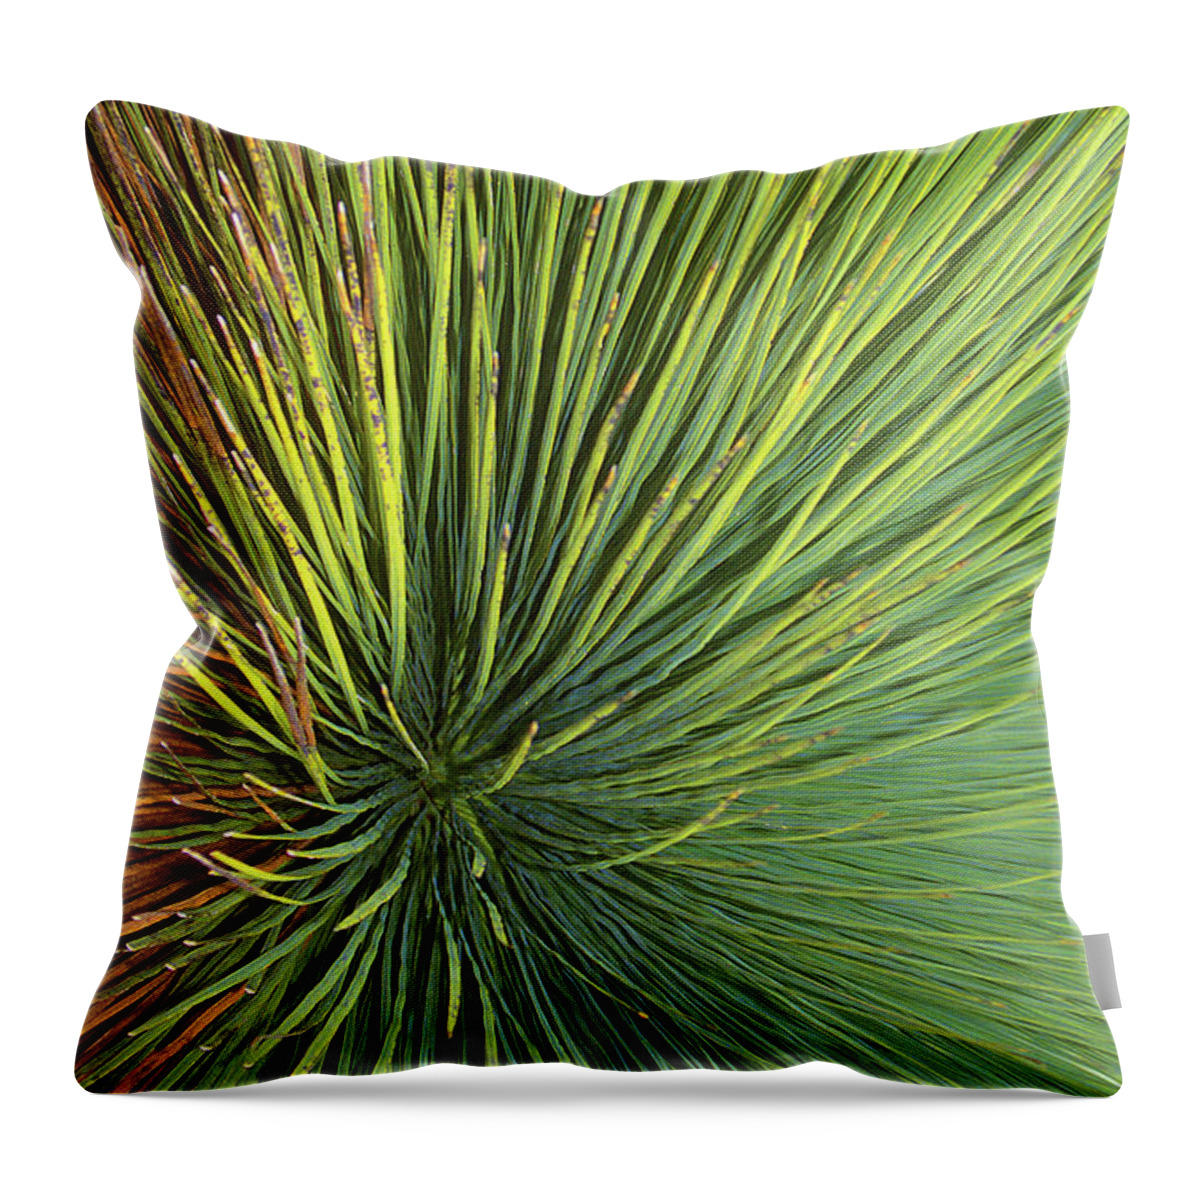 Radiate Throw Pillow featuring the photograph Radiating by Ted Keller